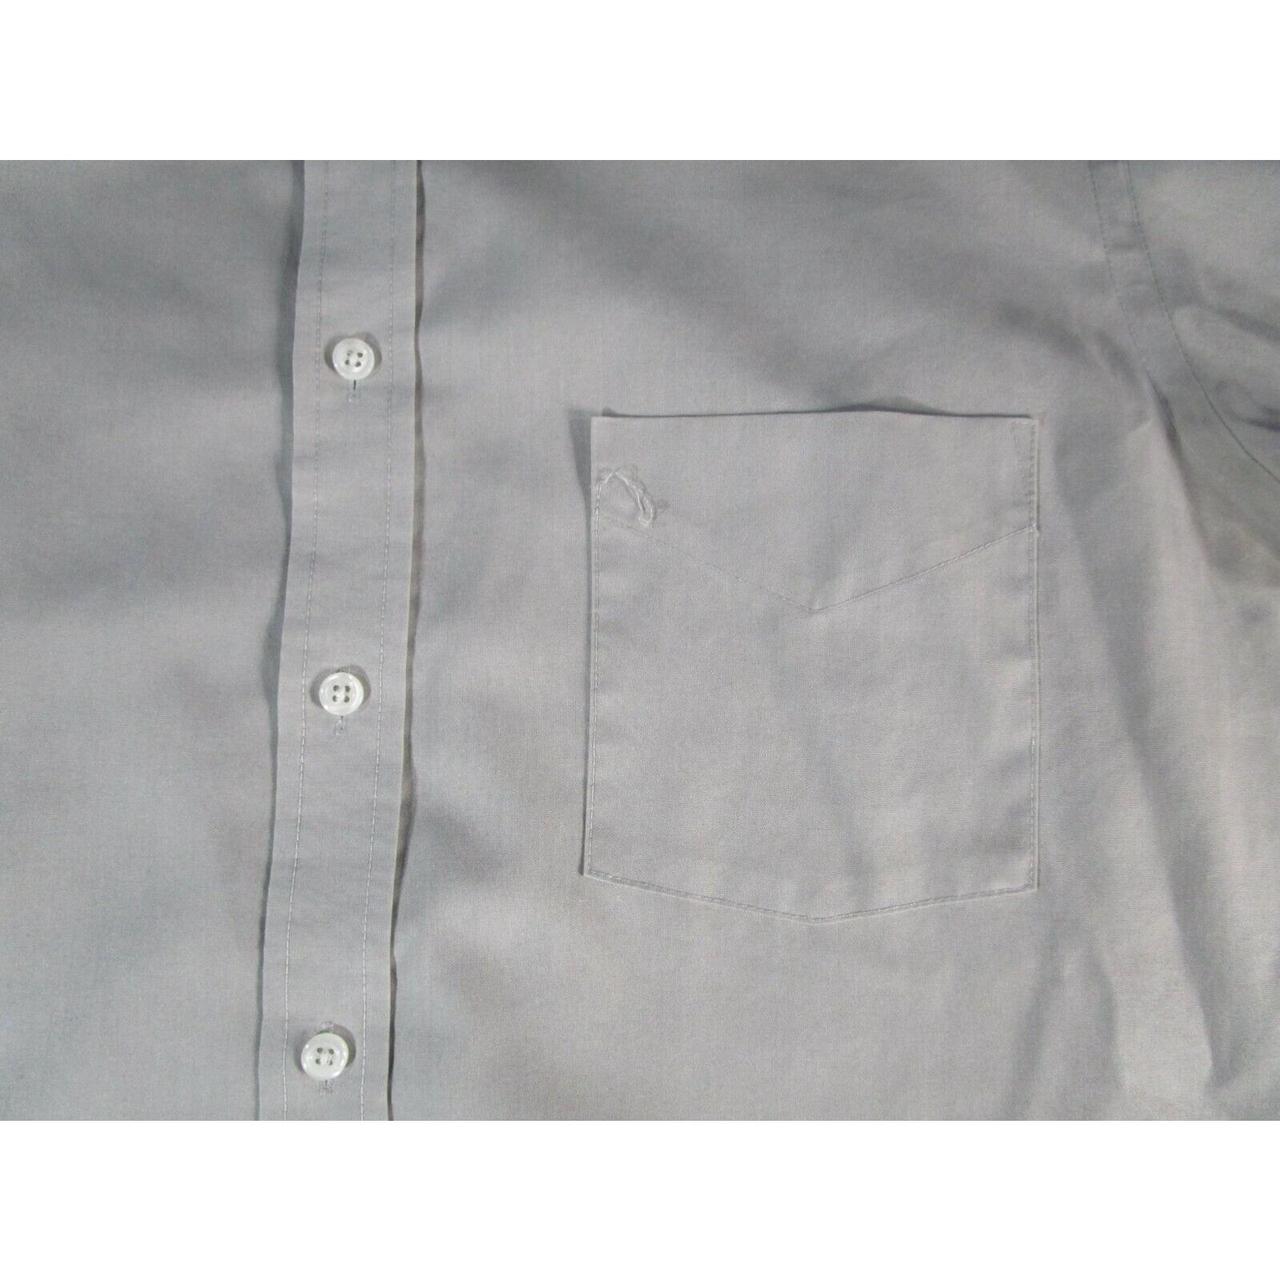 Product Image 2 - Towncraft Button Shirt Mens L